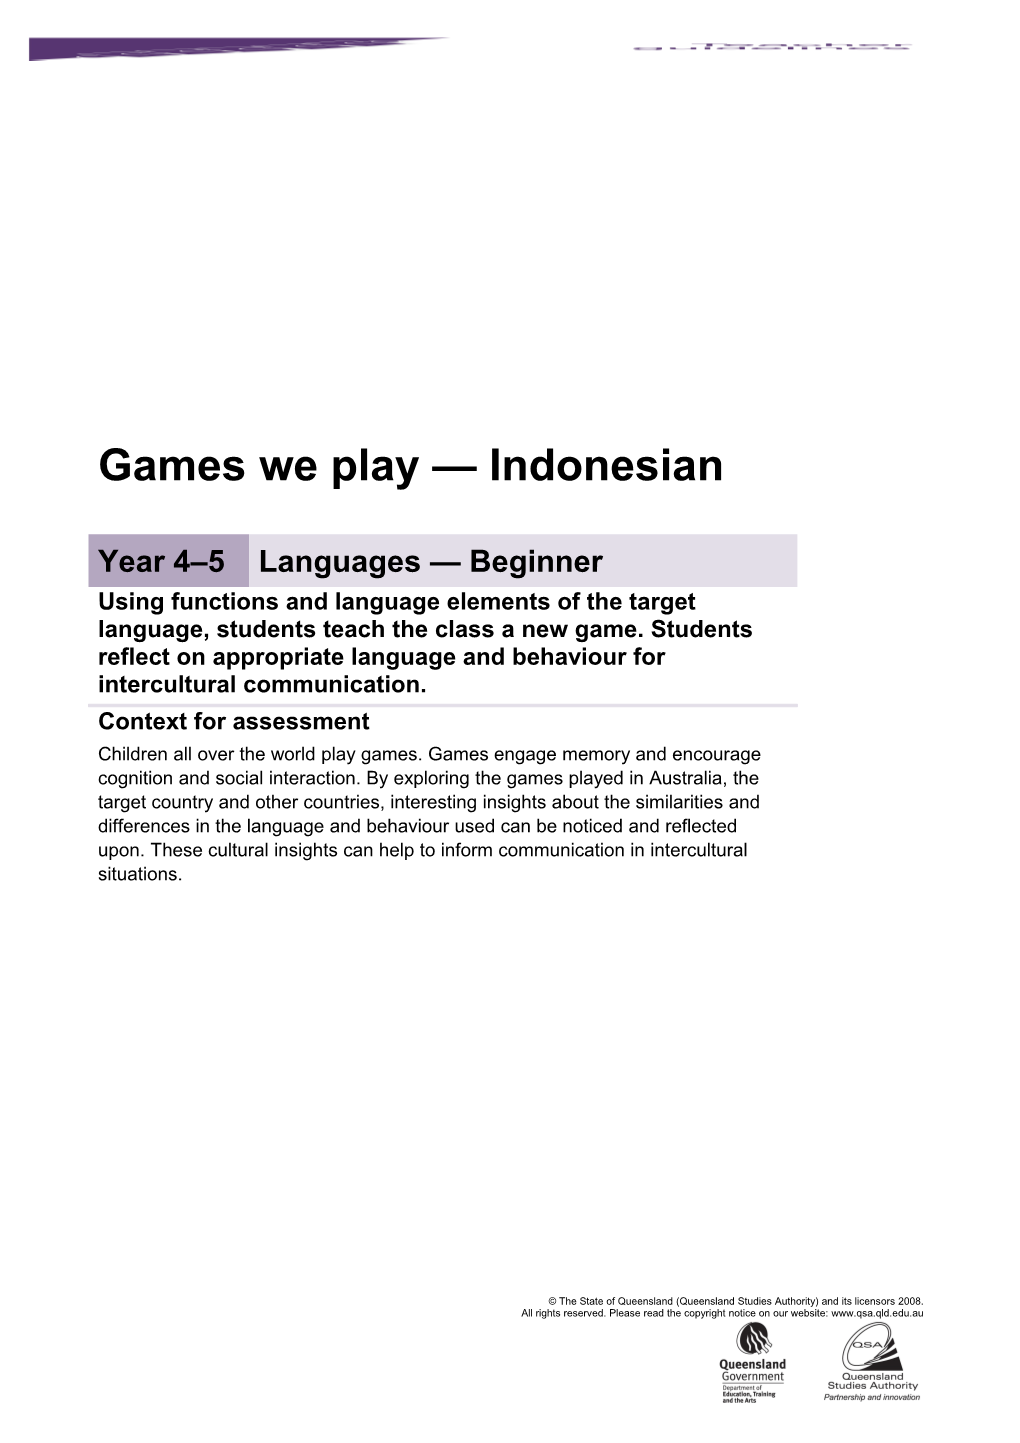 Year 4-5 Languages Assessment Teacher Guidelines Games We Play - Indonesian Queensland